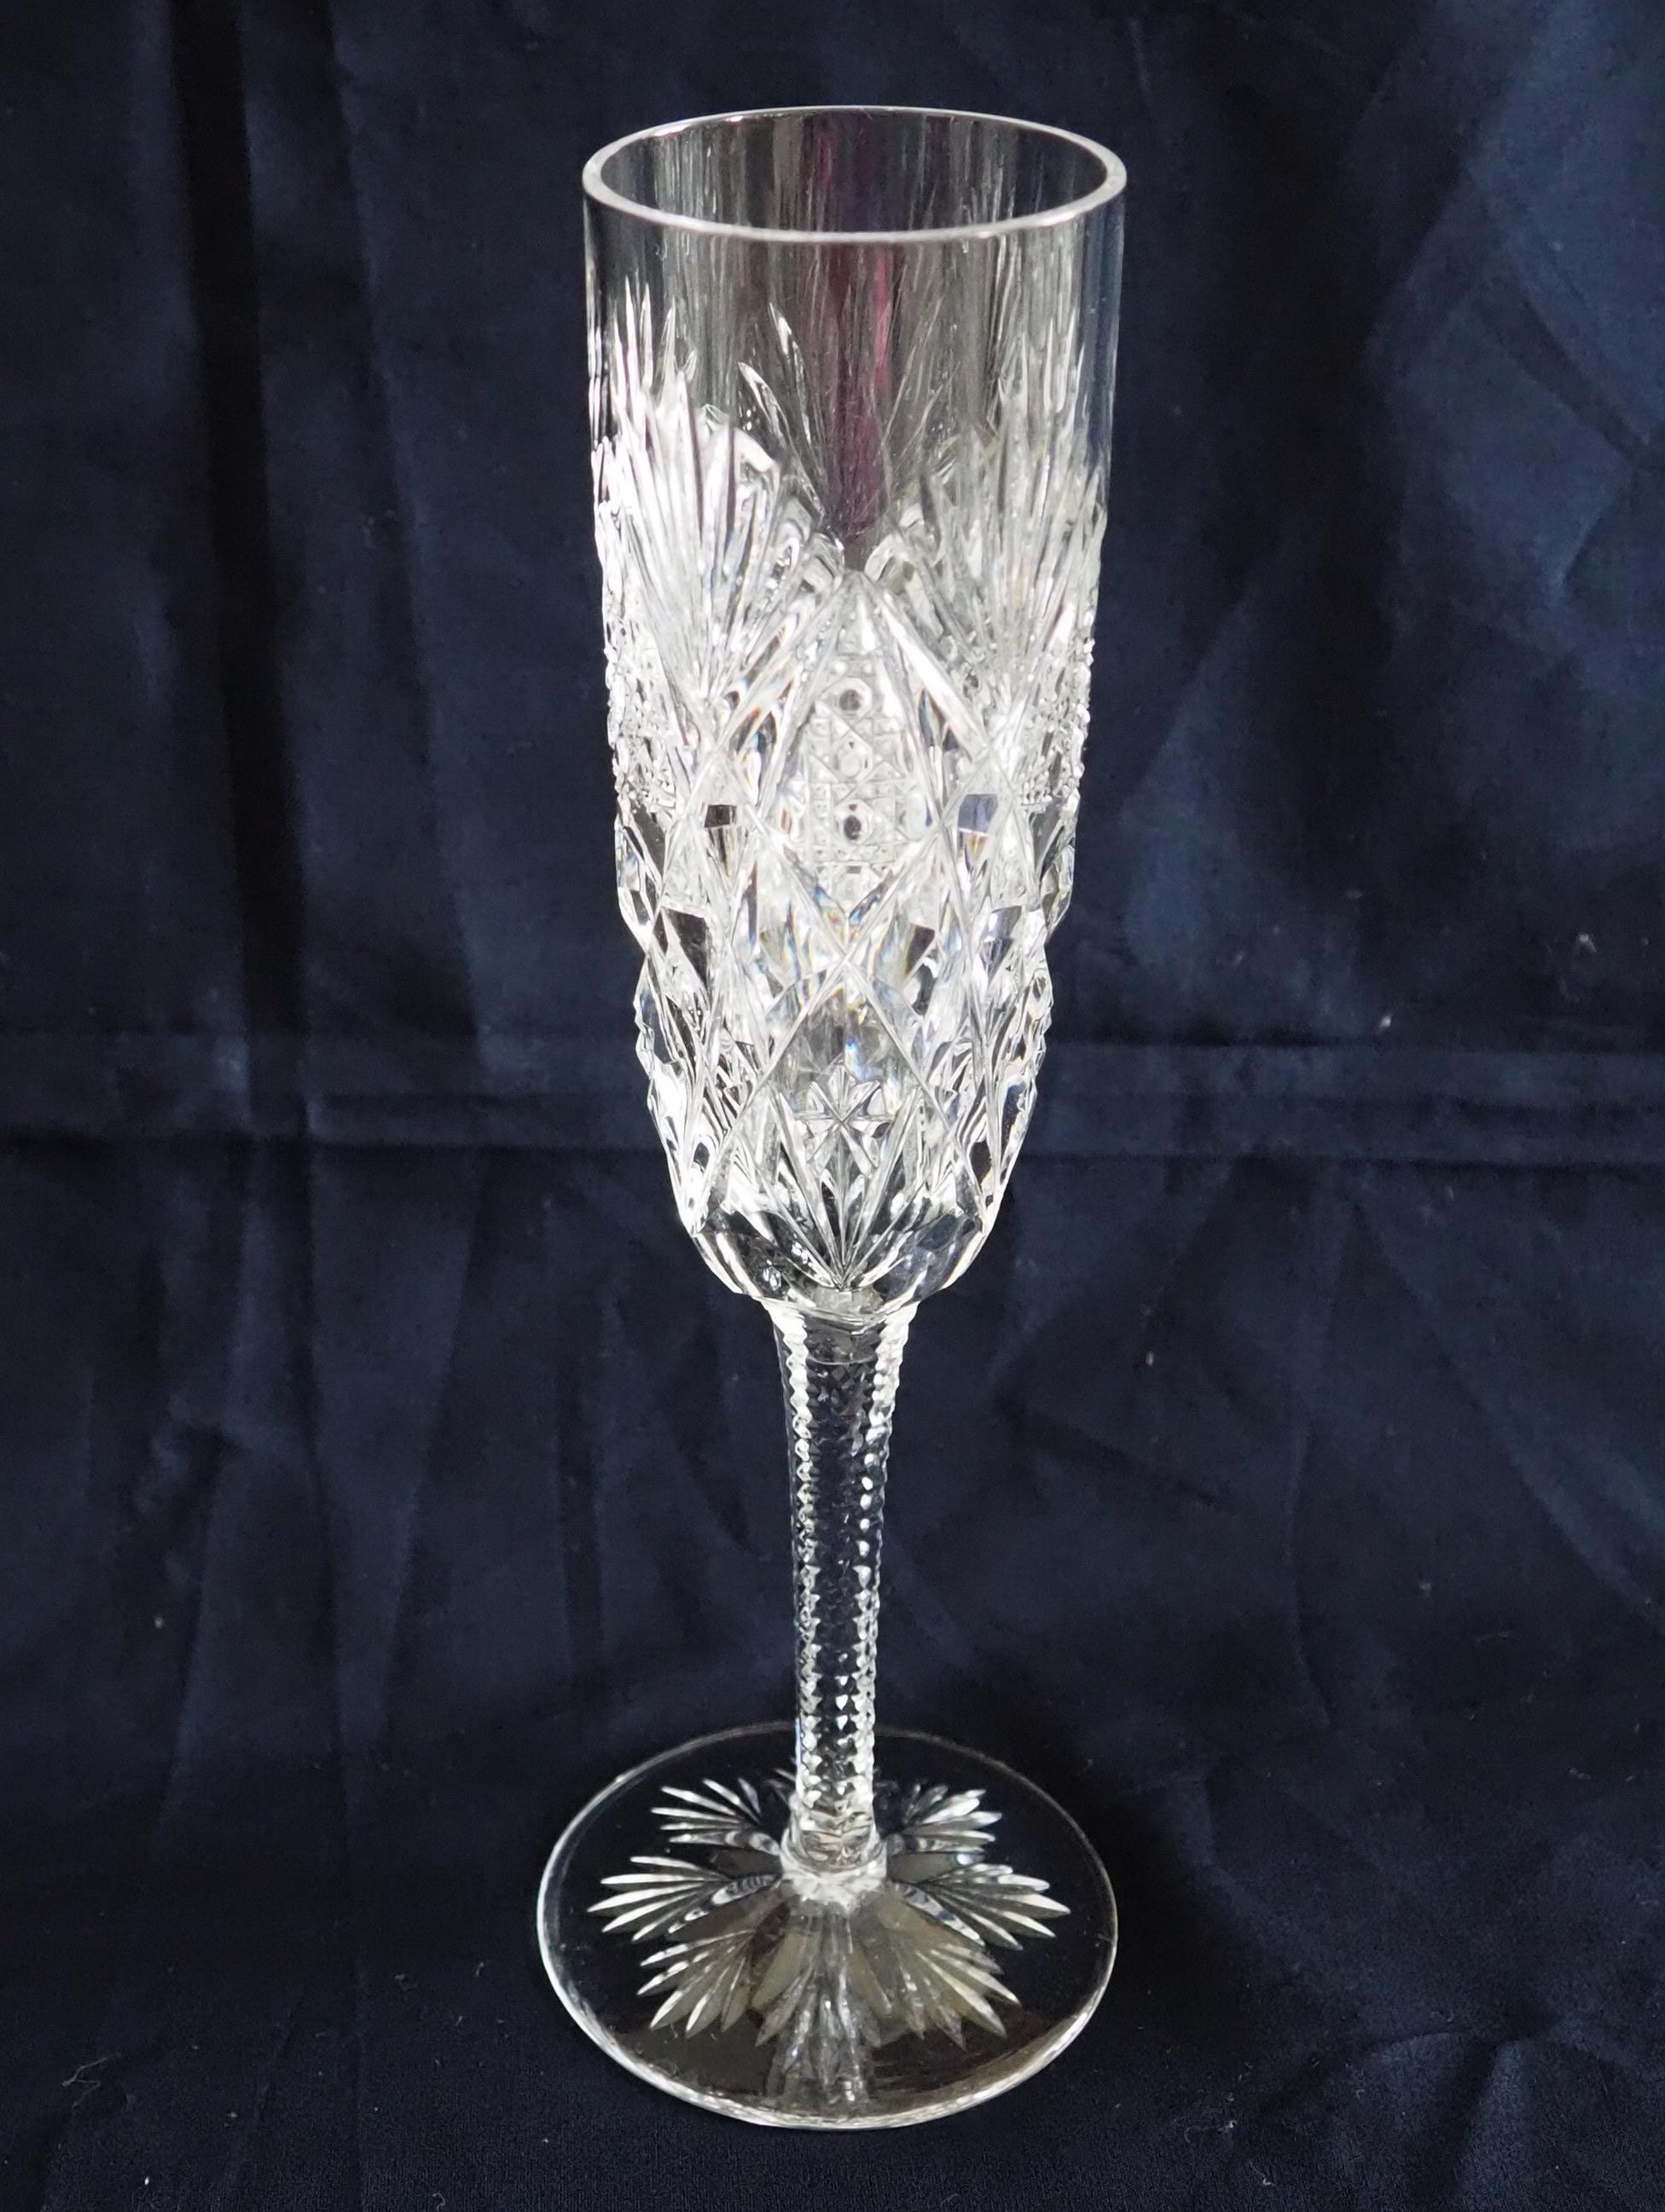 Set of 24 St Louis crystal glasses (6*4), Florence pattern - signed - 6 guests 6